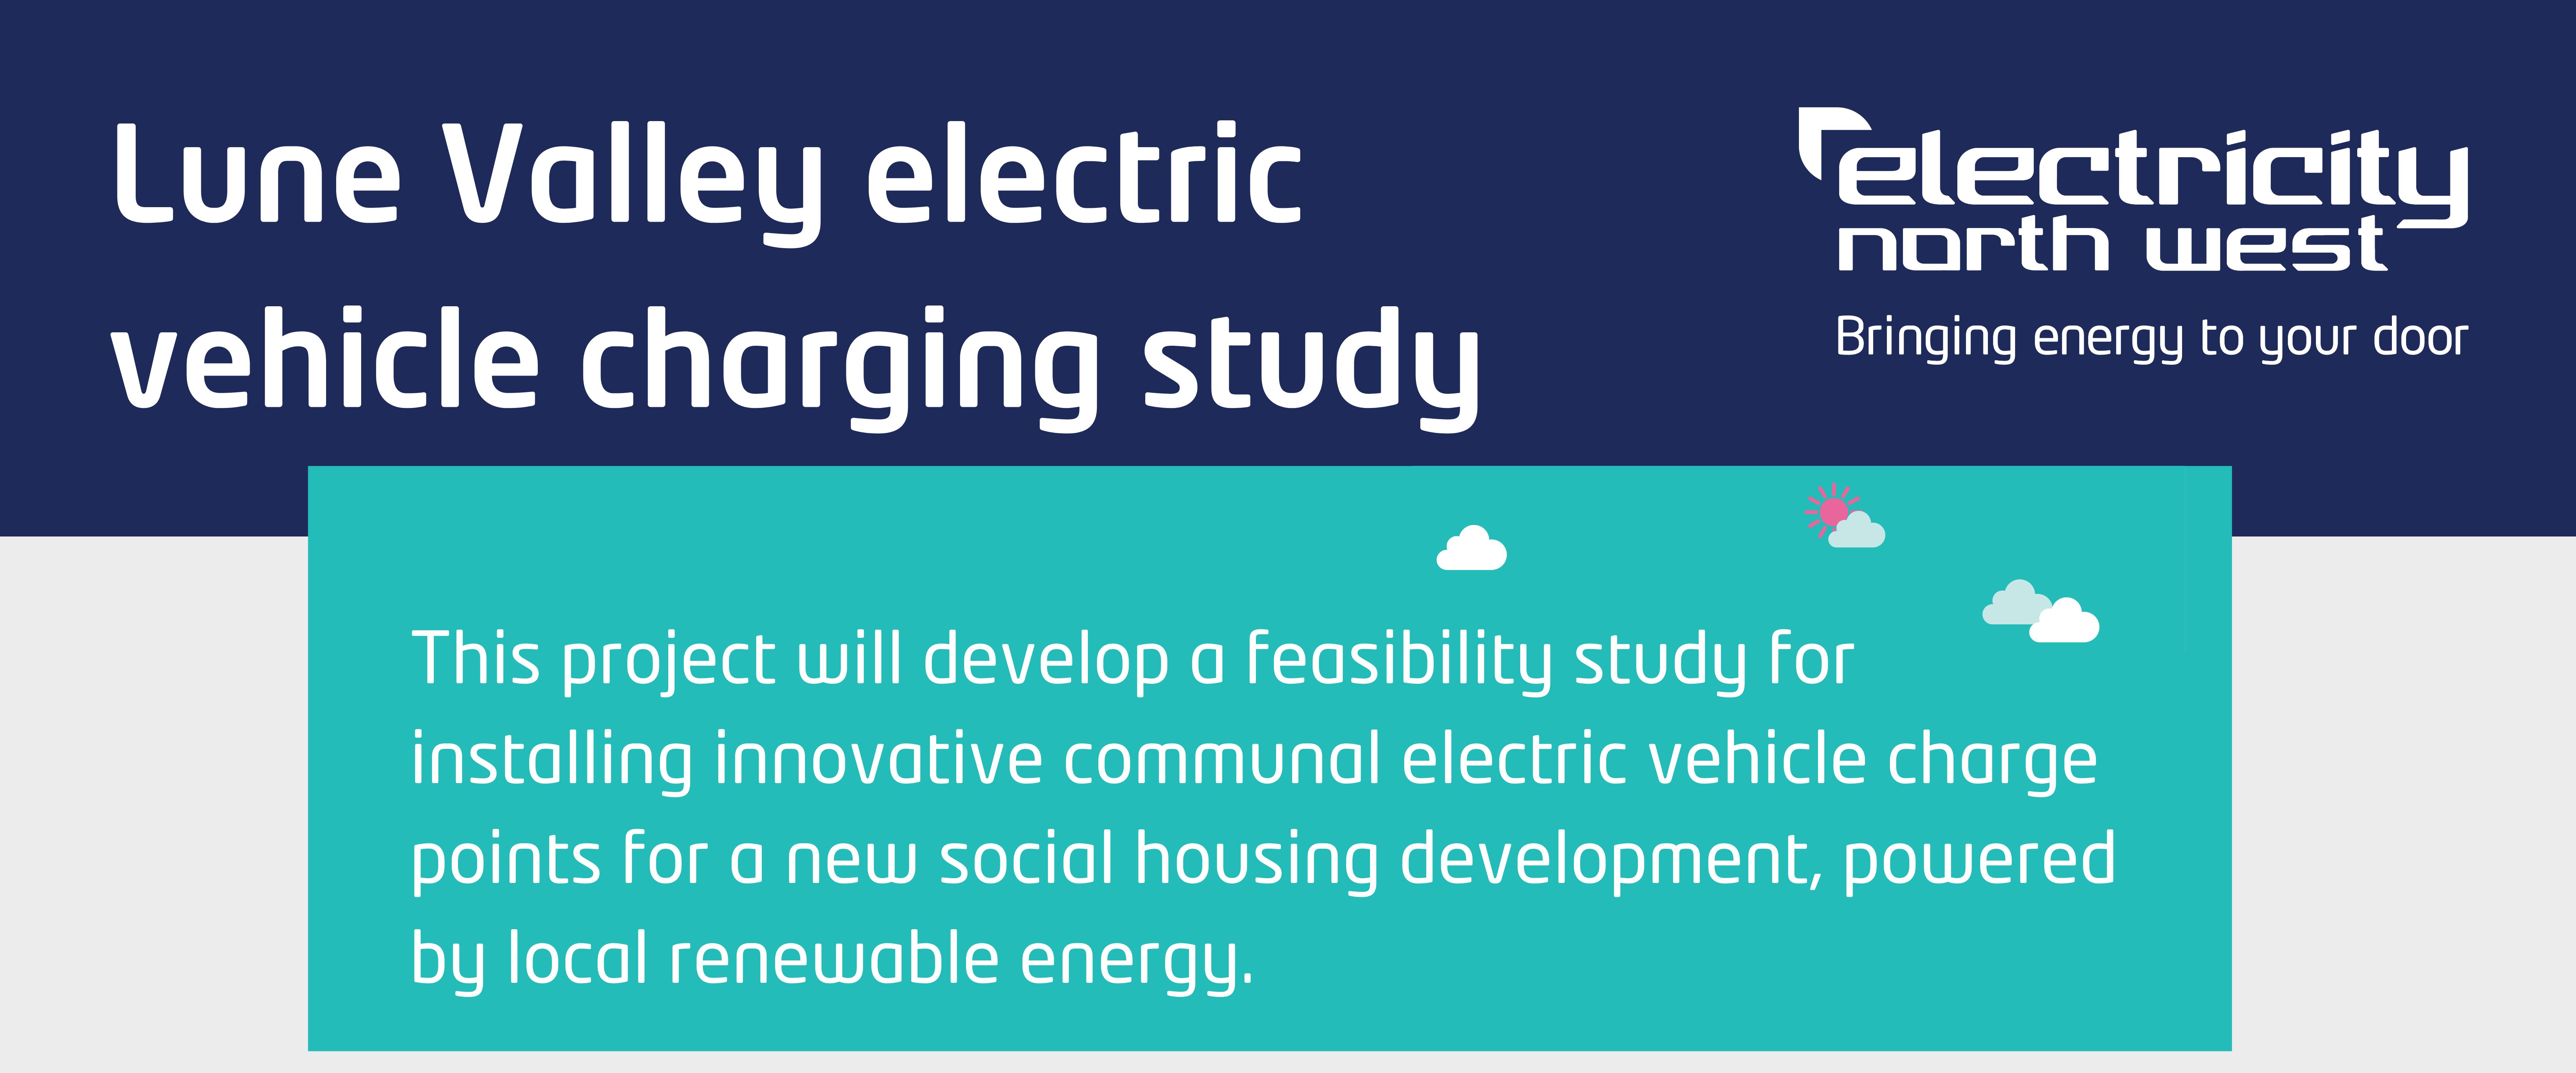 LuneValley electric vehicle charging study, This project will develop a feasibility study for installing innovative communal electric vehicle charge points for a new social housing development, powered by local renewable energy.

Organisation behind the project